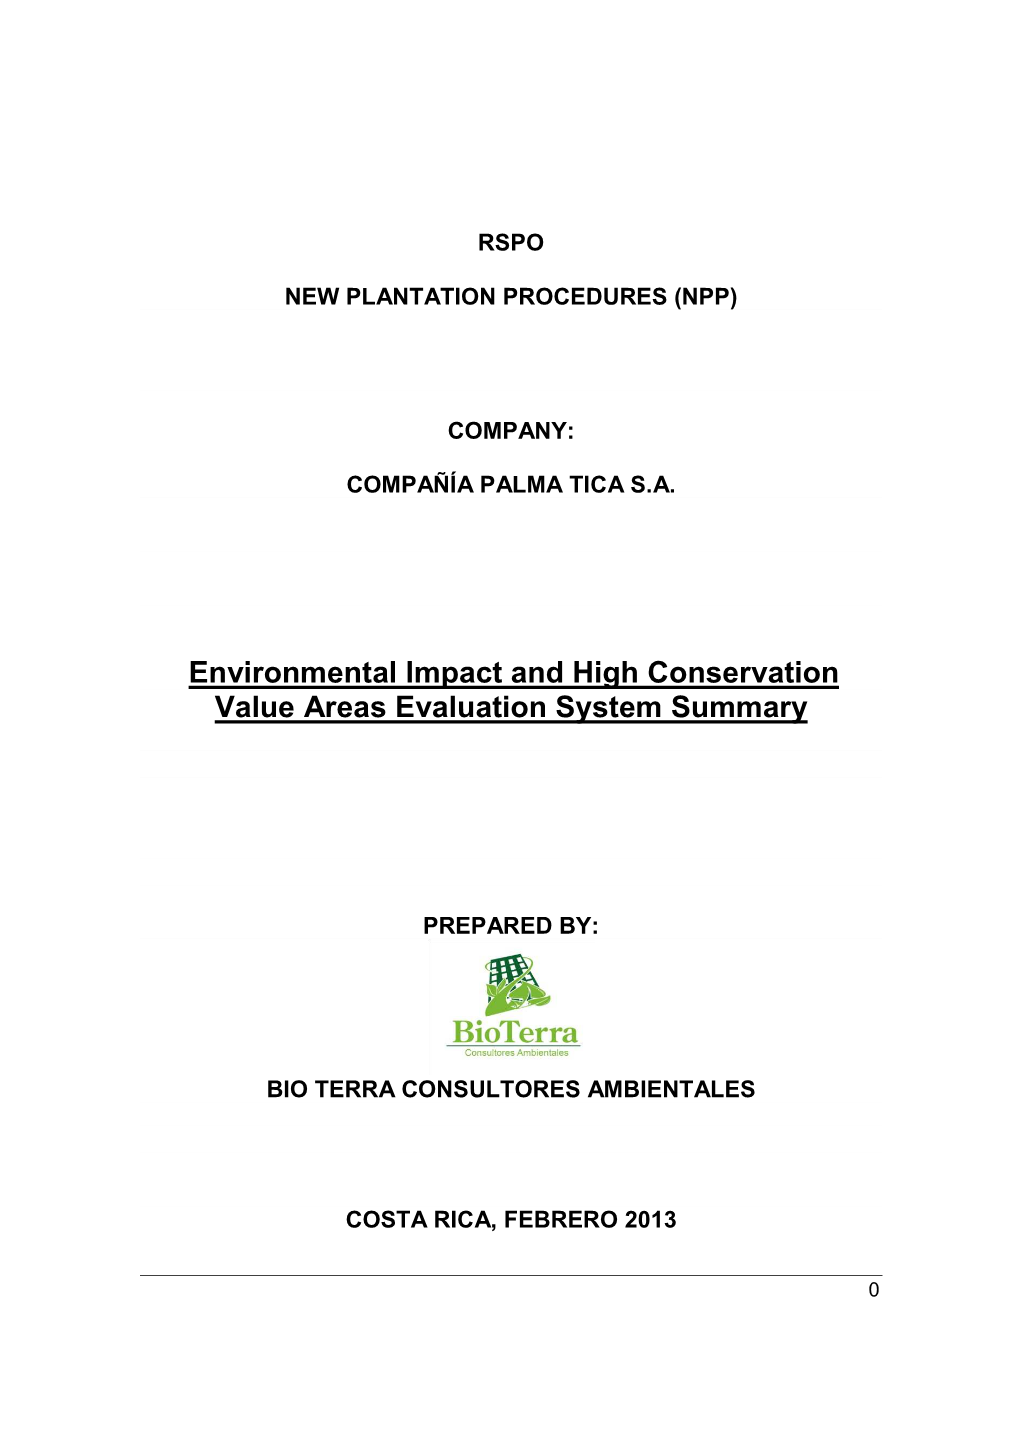 Environmental Impact and High Conservation Value Areas Evaluation System Summary